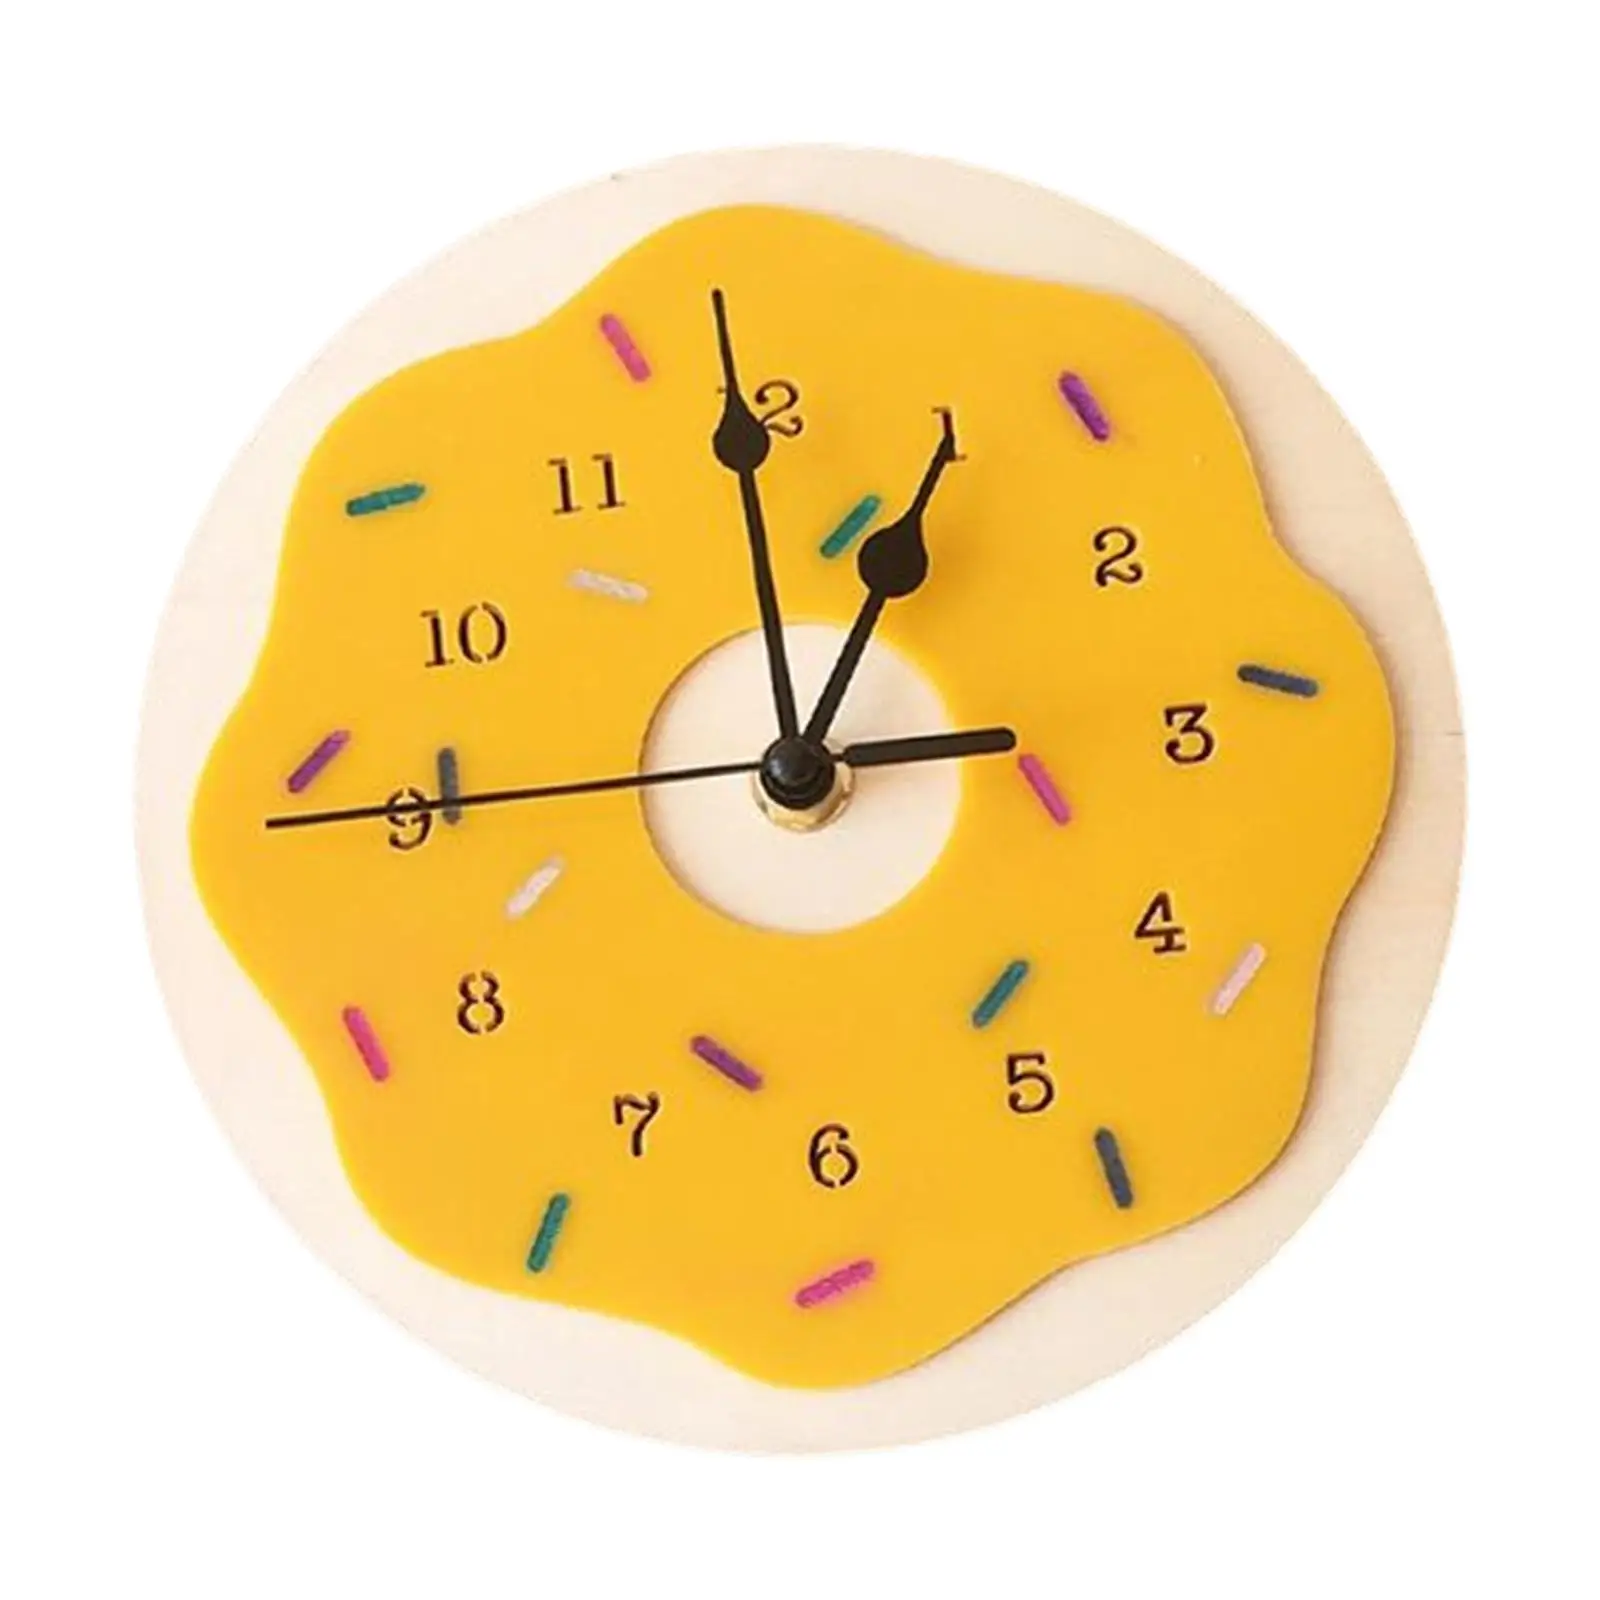 Nordic Style Donut Shaped Wall Clock Silent Art Decor Wooden Ornament Gift Crafts for Kids Room Home Living Room Nursery Shop